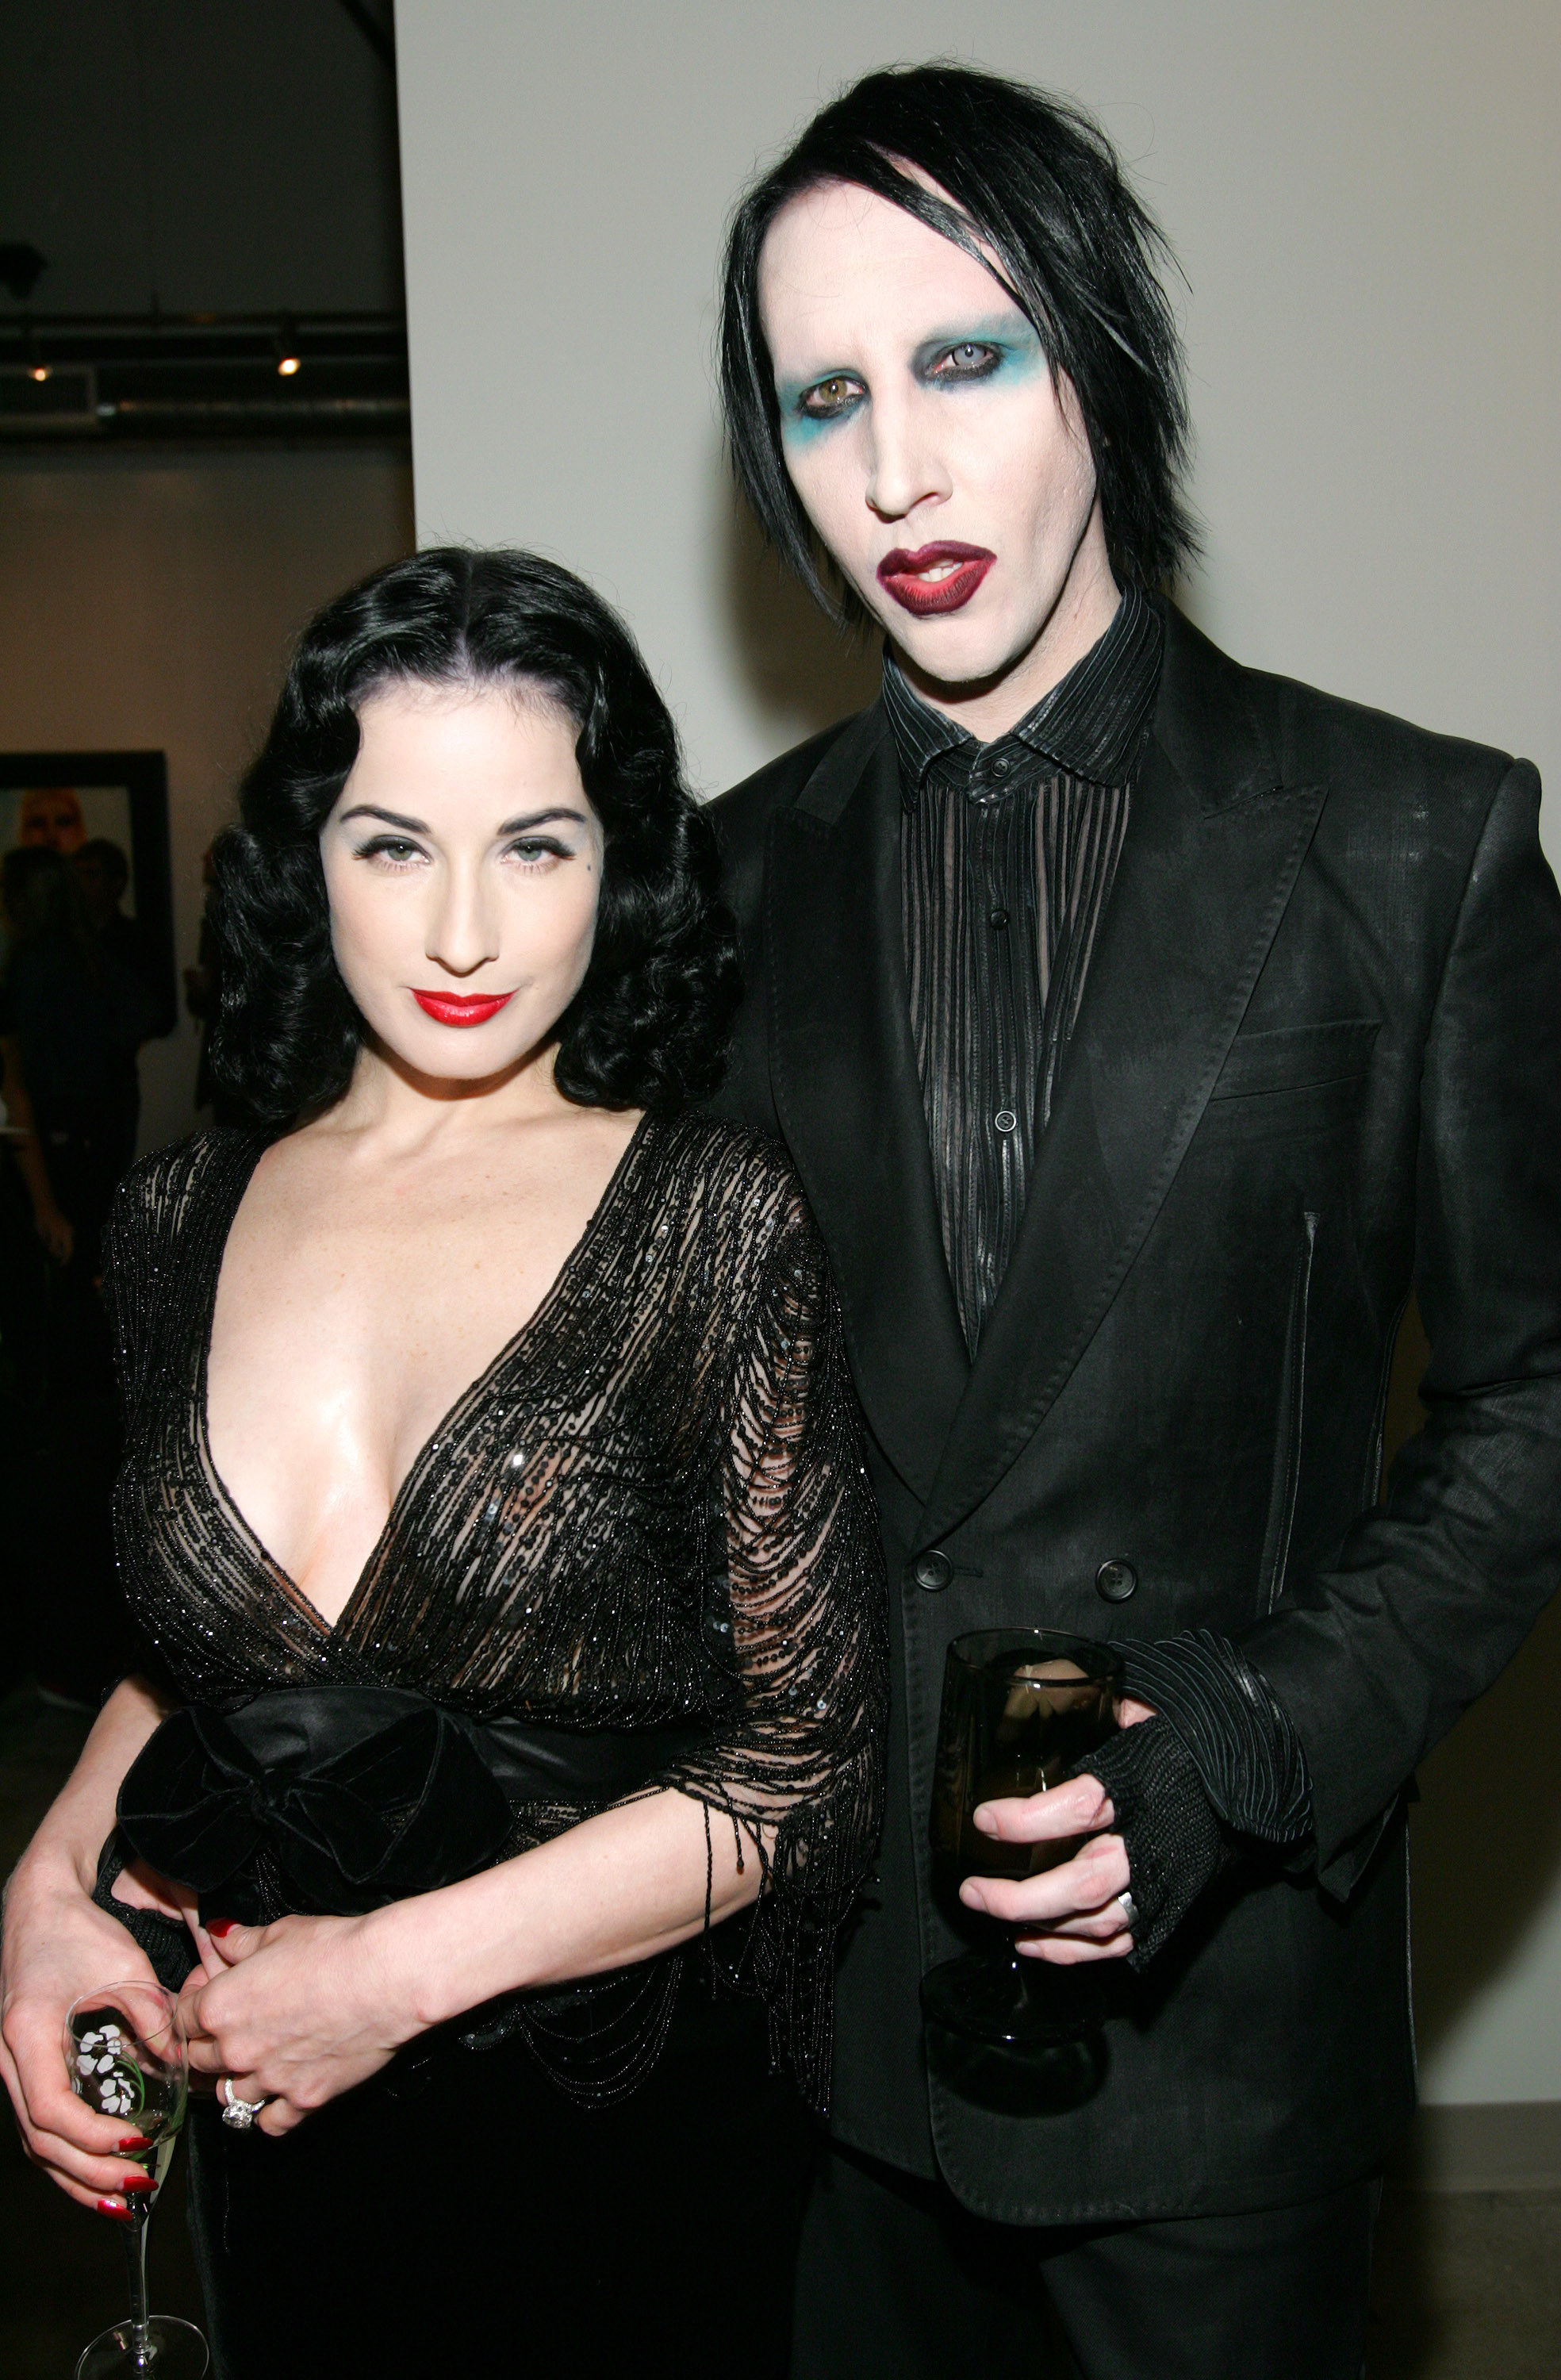 Dita Von Teese and Marilyn Manson stand next to each other.